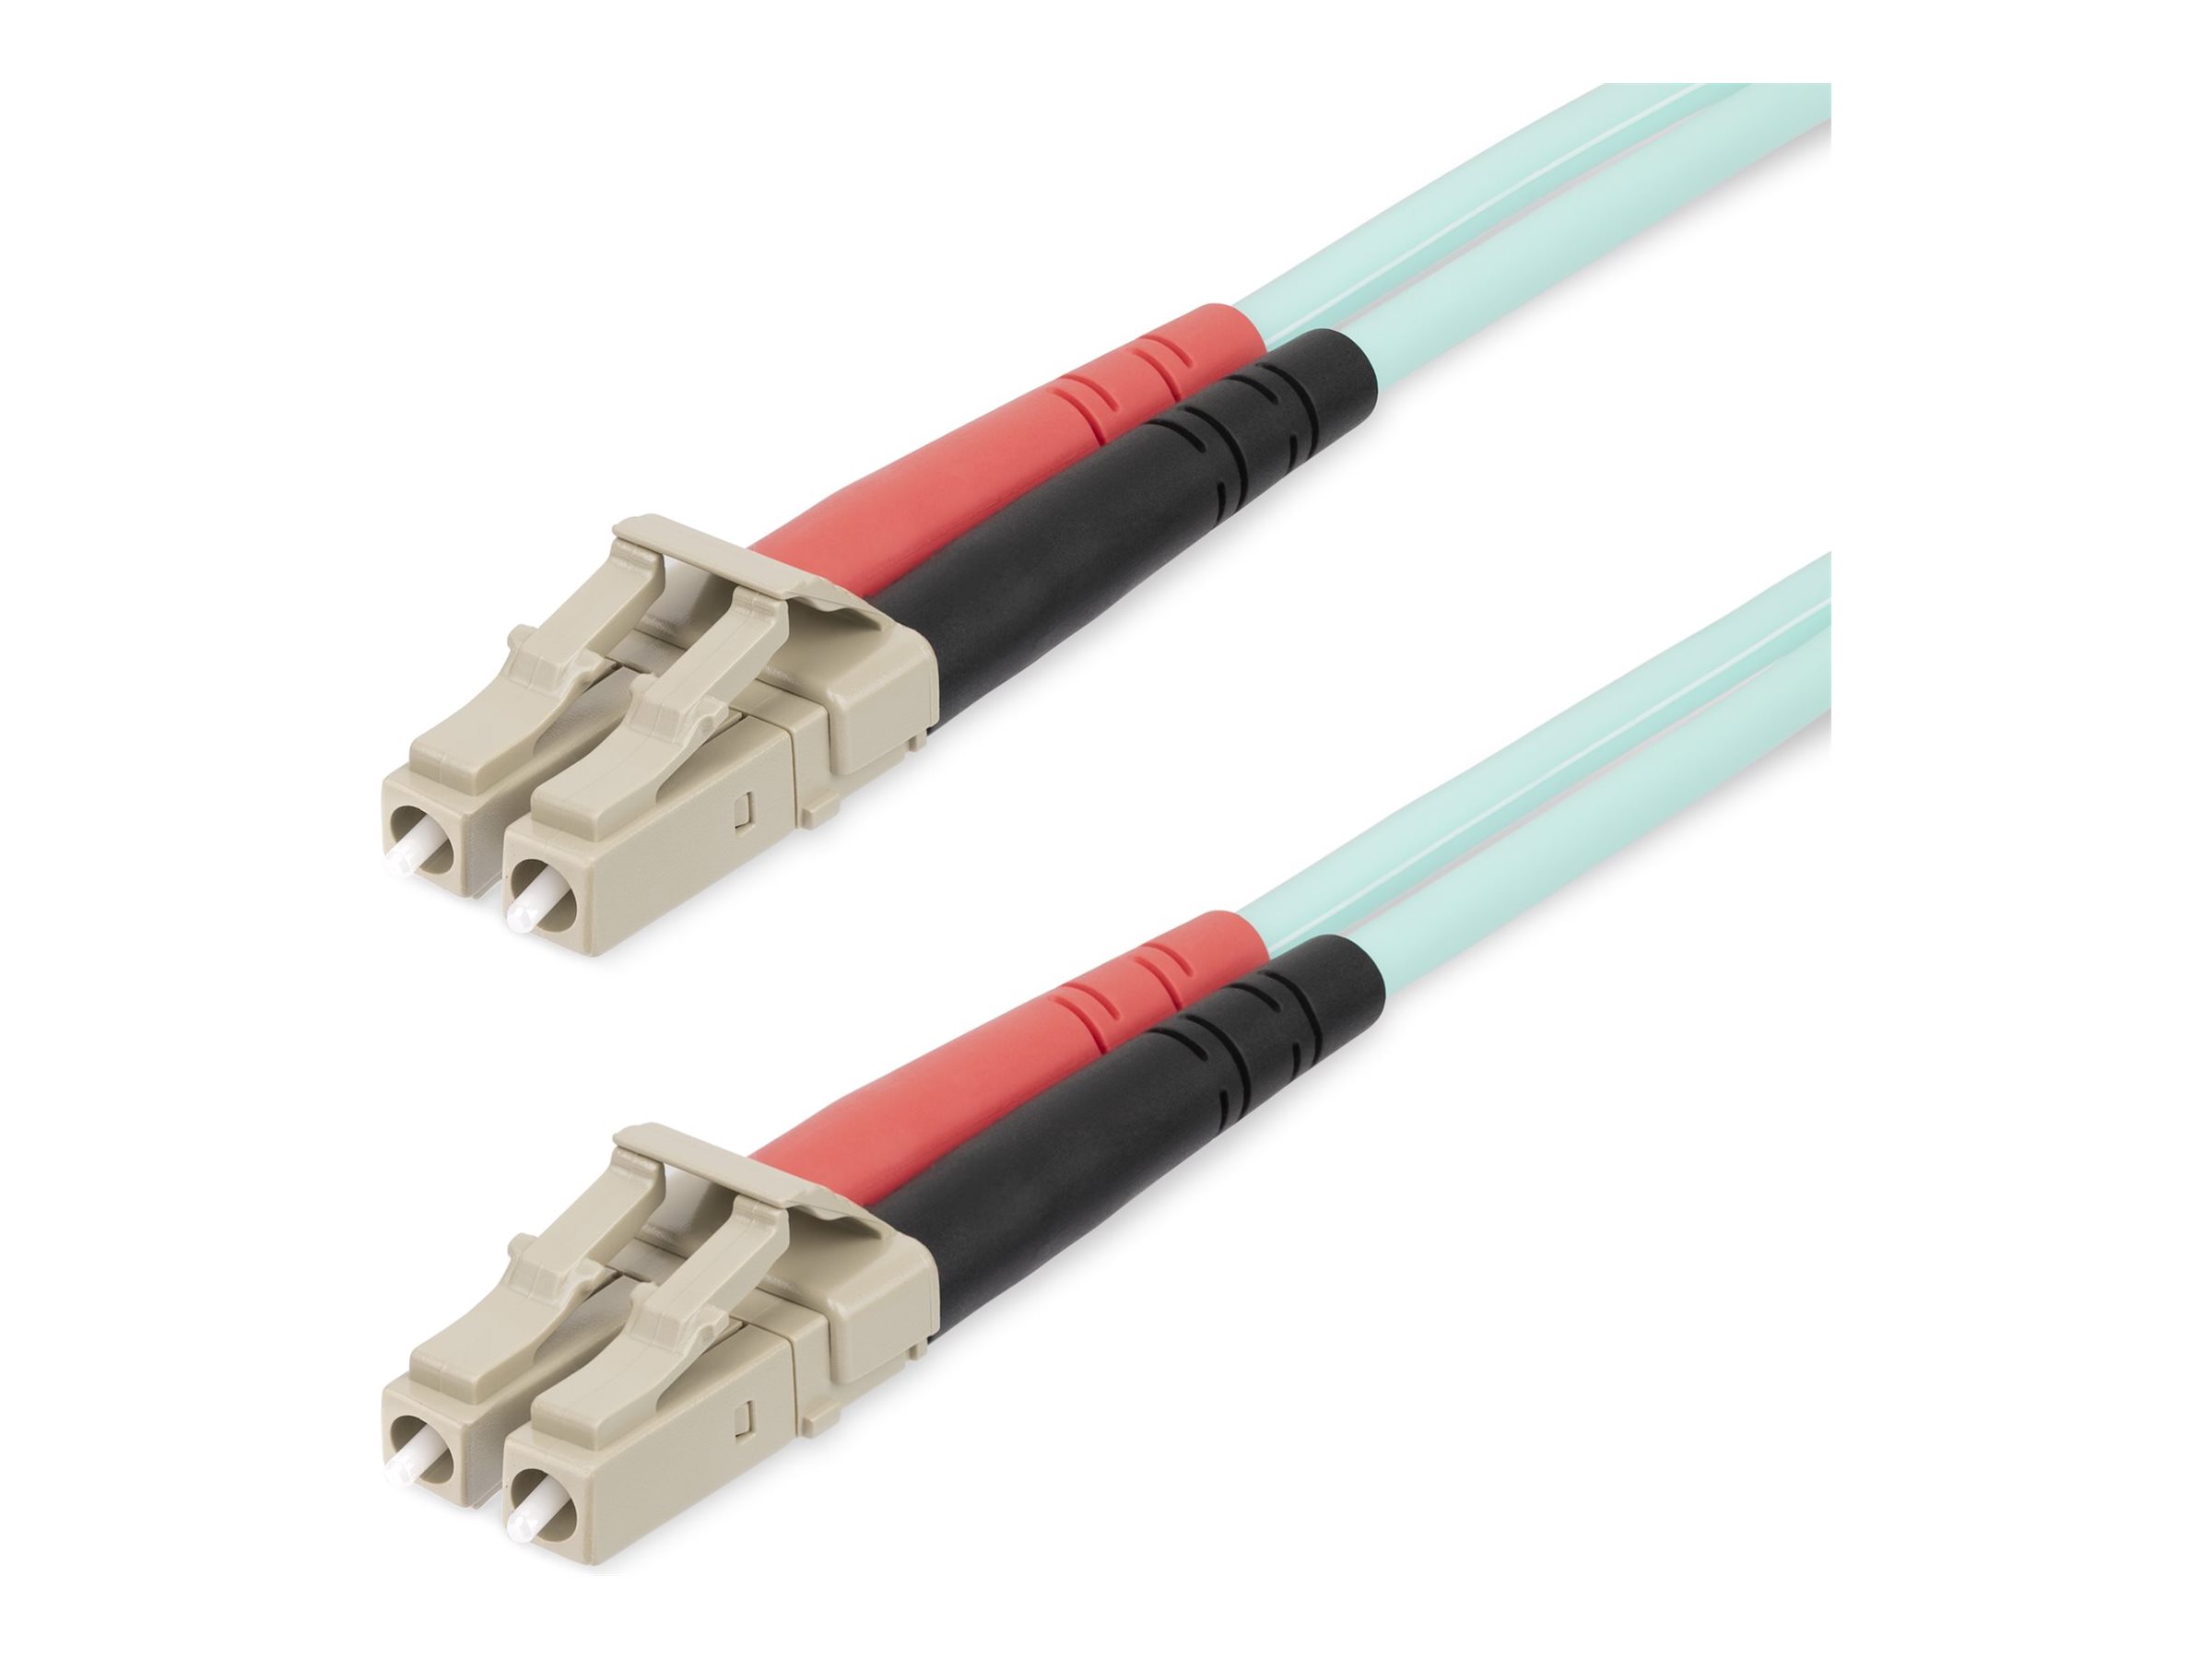 StarTech.com 20m (65ft) LC/UPC to LC/UPC OM4 Multimode Fiber Optic Cable, 50/125m LOMMF/VCSEL Zipcord Fiber, 100G Networks, Low